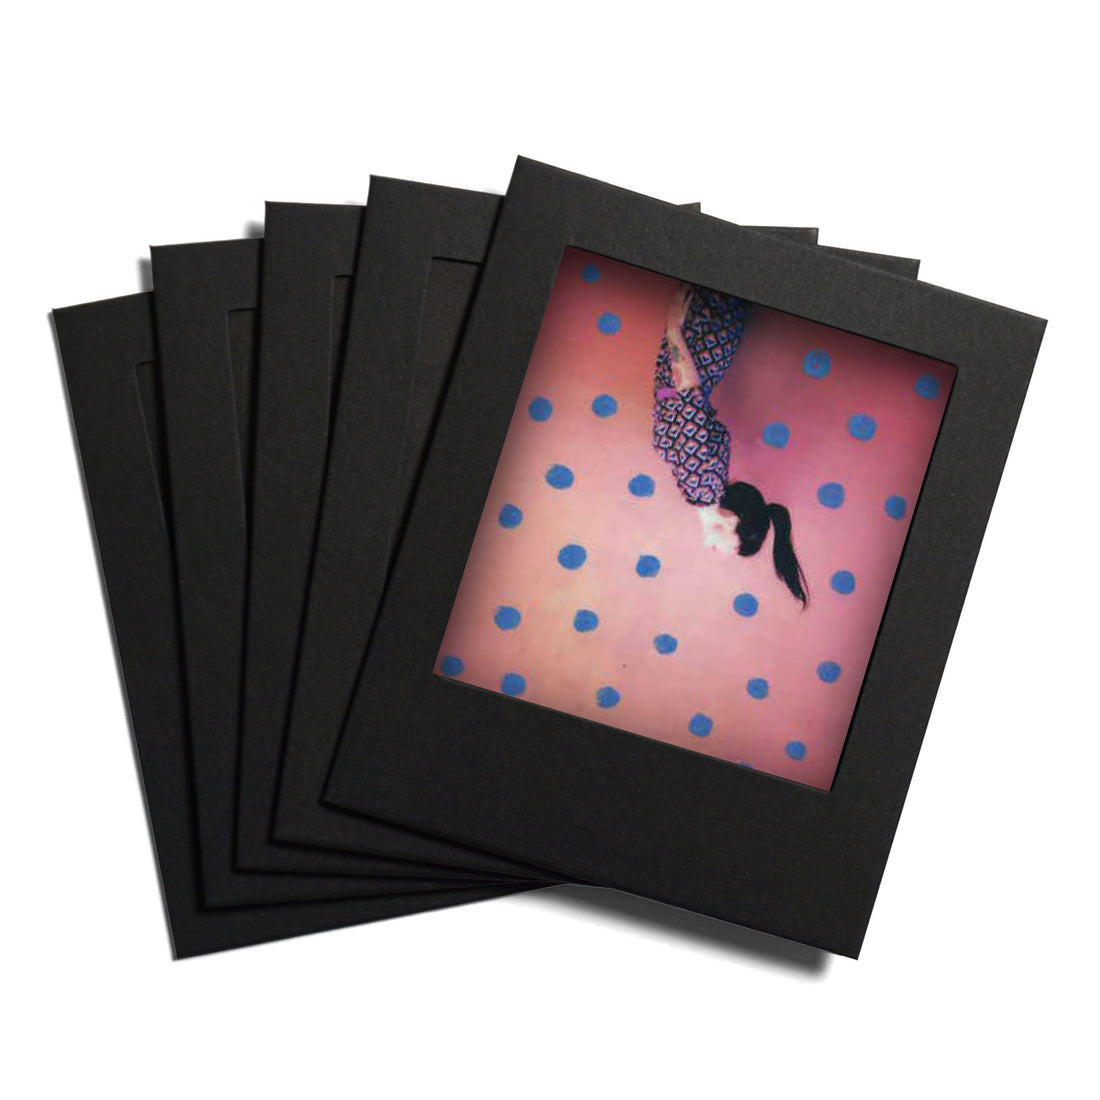 5 x Instant Photocards „Black“